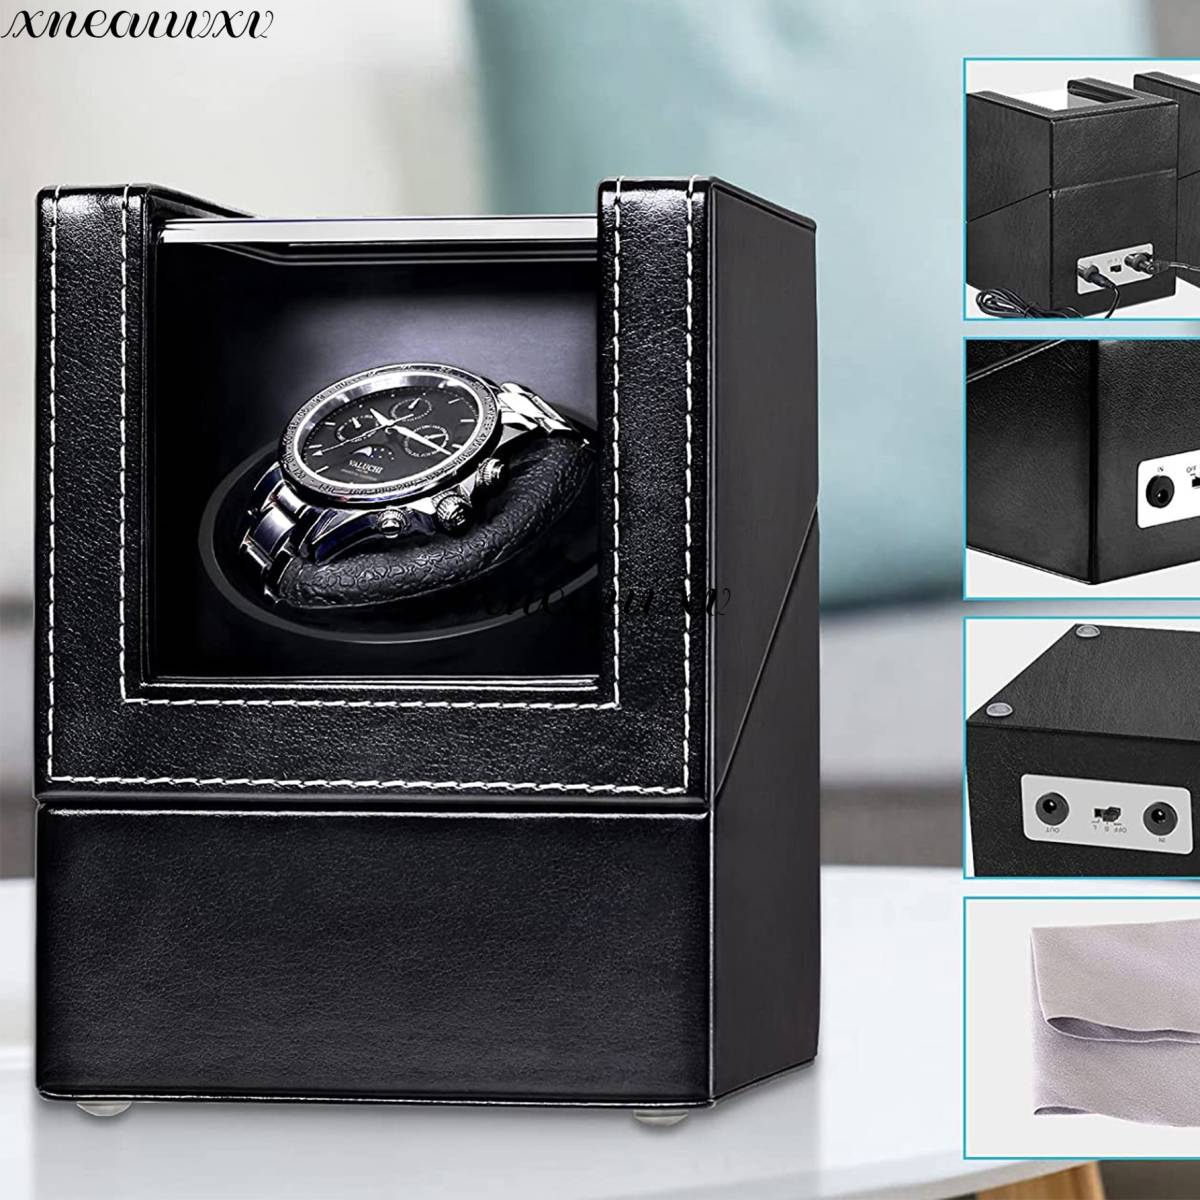  exceedingly convenient winding machine black 1 pcs to coil self-winding watch up machine watch my nda- wristwatch box wristwatch self-winding watch box 